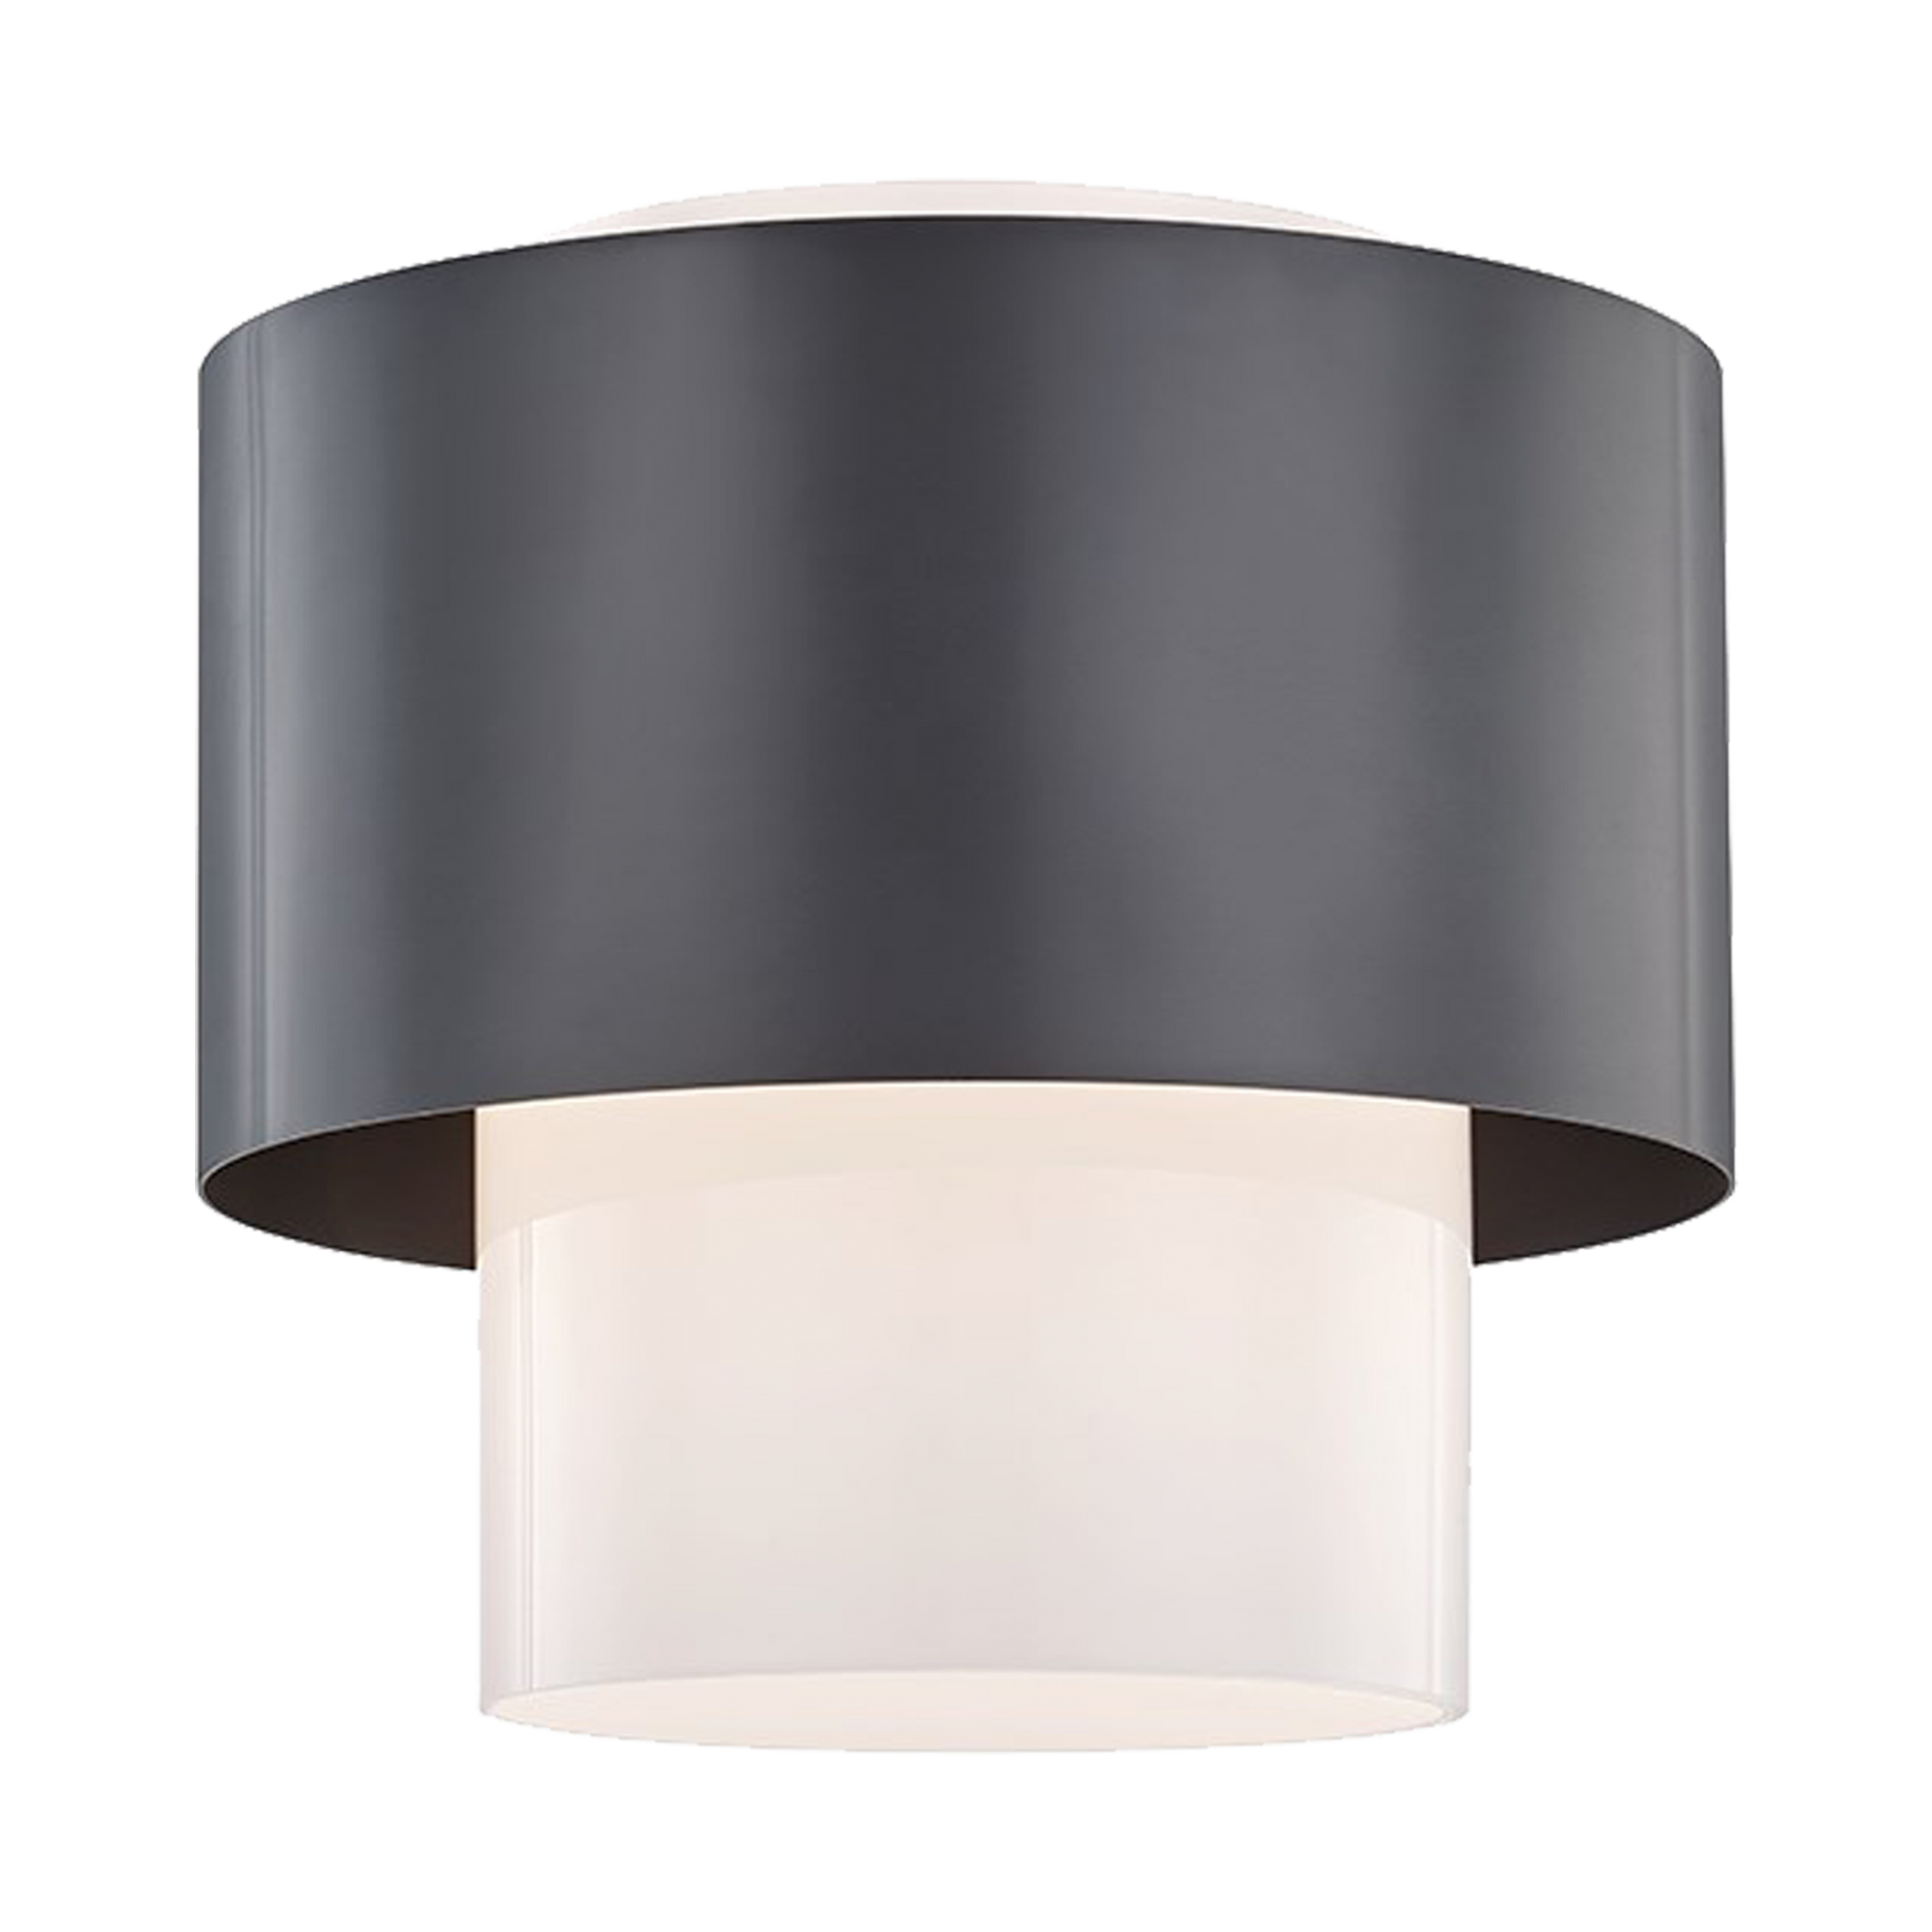 A sleek cylinder diffuser contrasted by an offset metal band, Corinth is an elegant decorative accent.